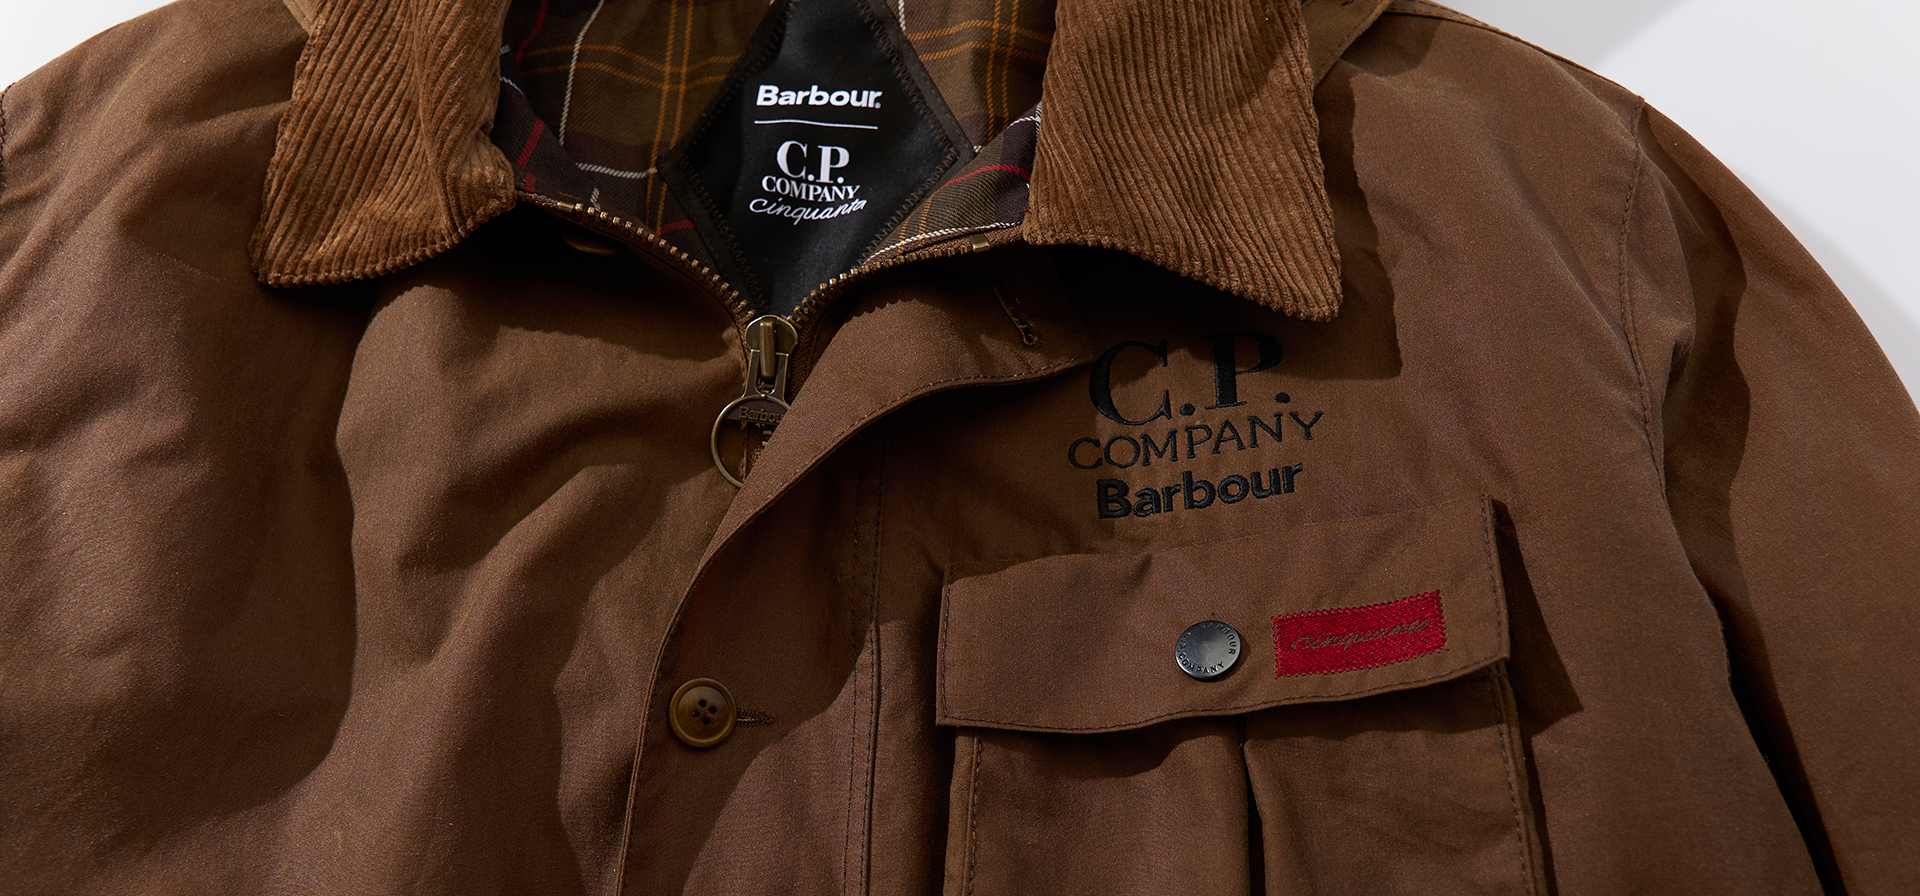 (Barbour) Barbour X C.P Company AW21